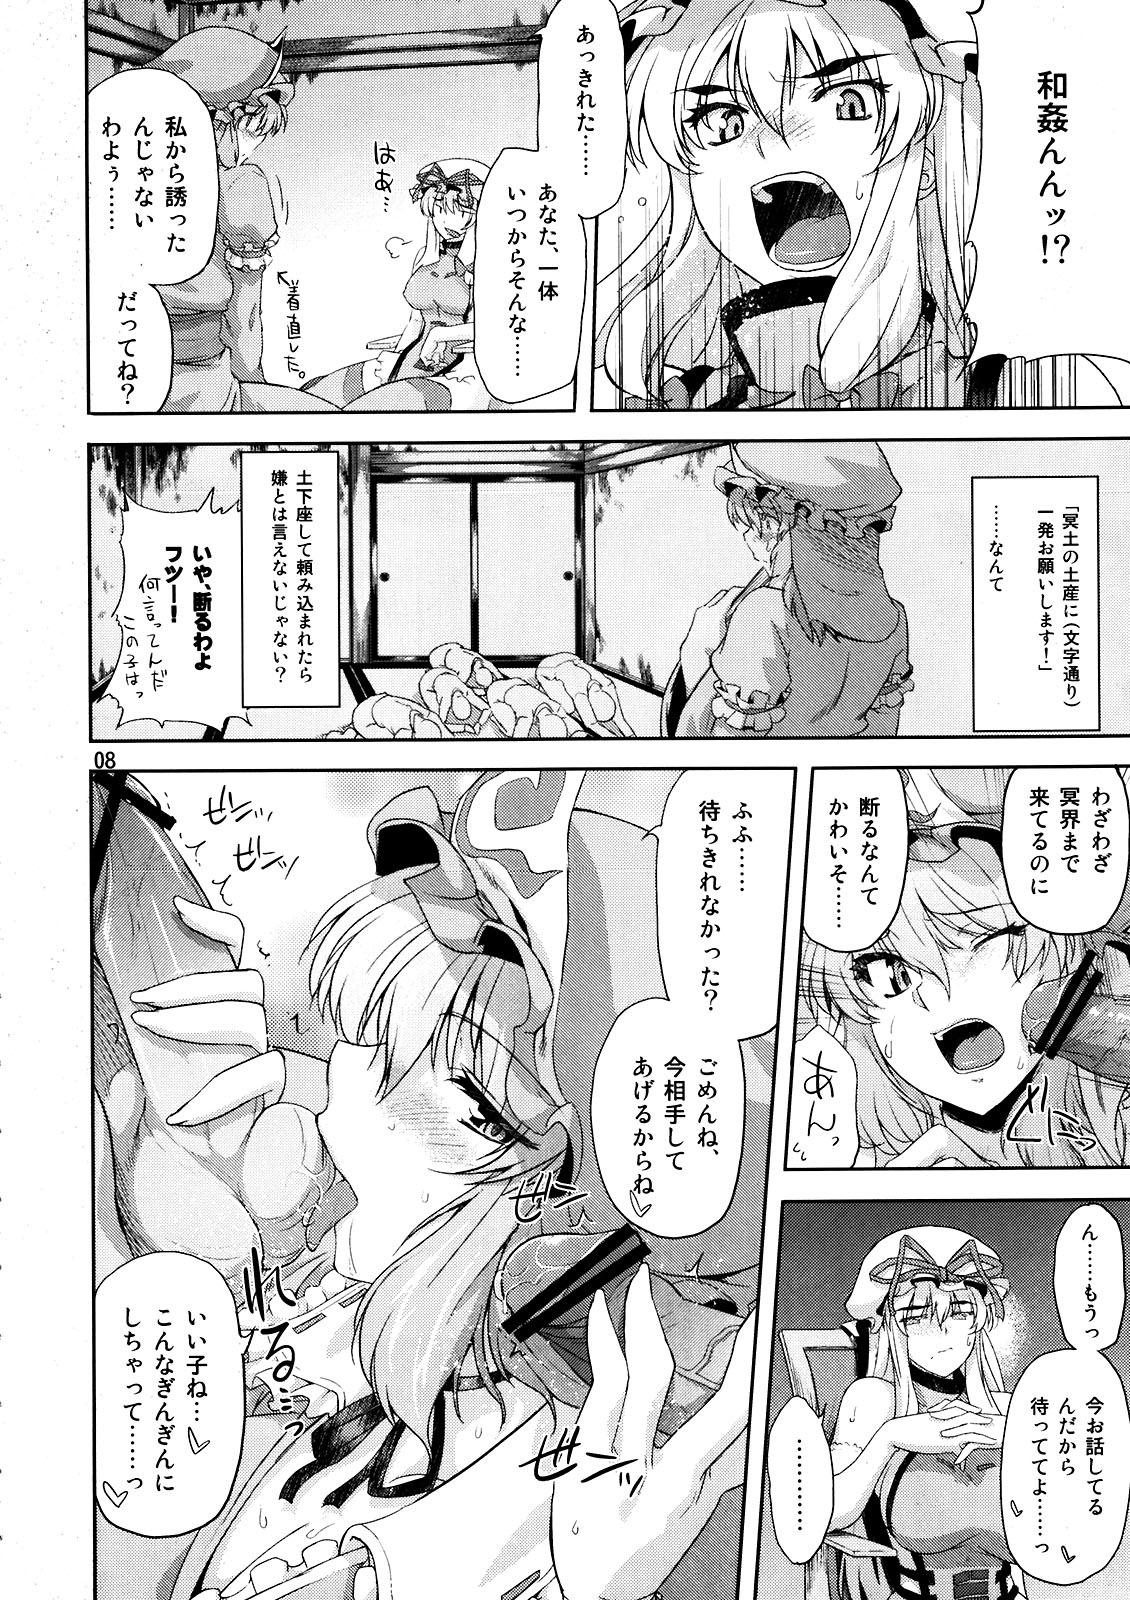 Women Sucking Toshimaen 0 - Touhou project Twinks - Page 8